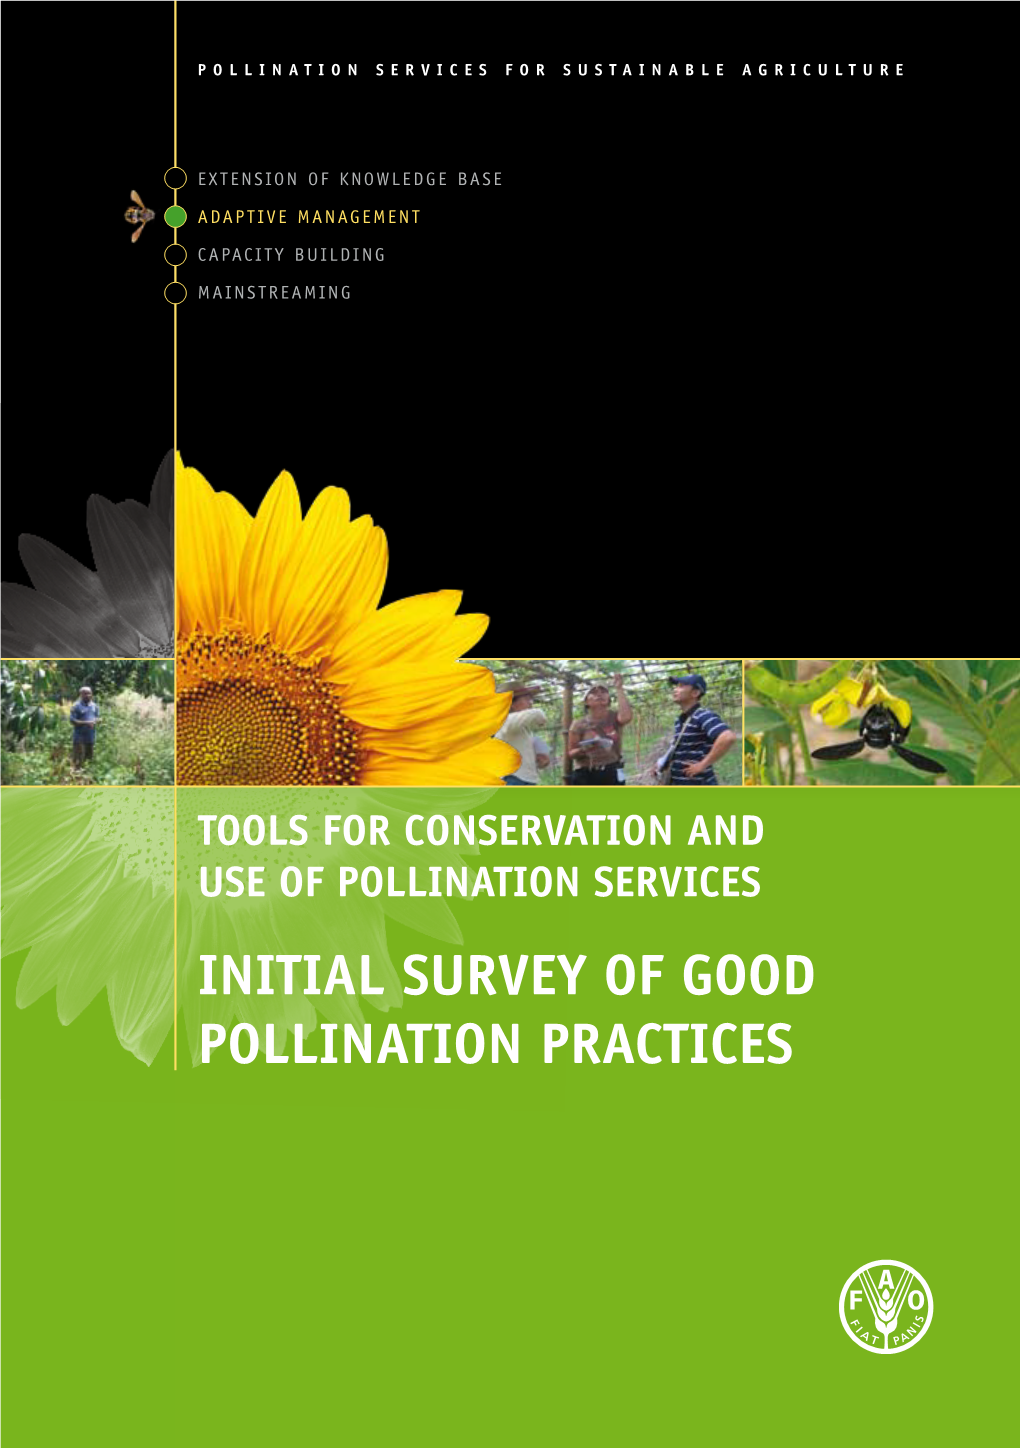 Initial SURVEY of GOOD POLLINATION PRACTICES POLLINATION SERVICES for S U STAINAB LE a G RICU LTURE